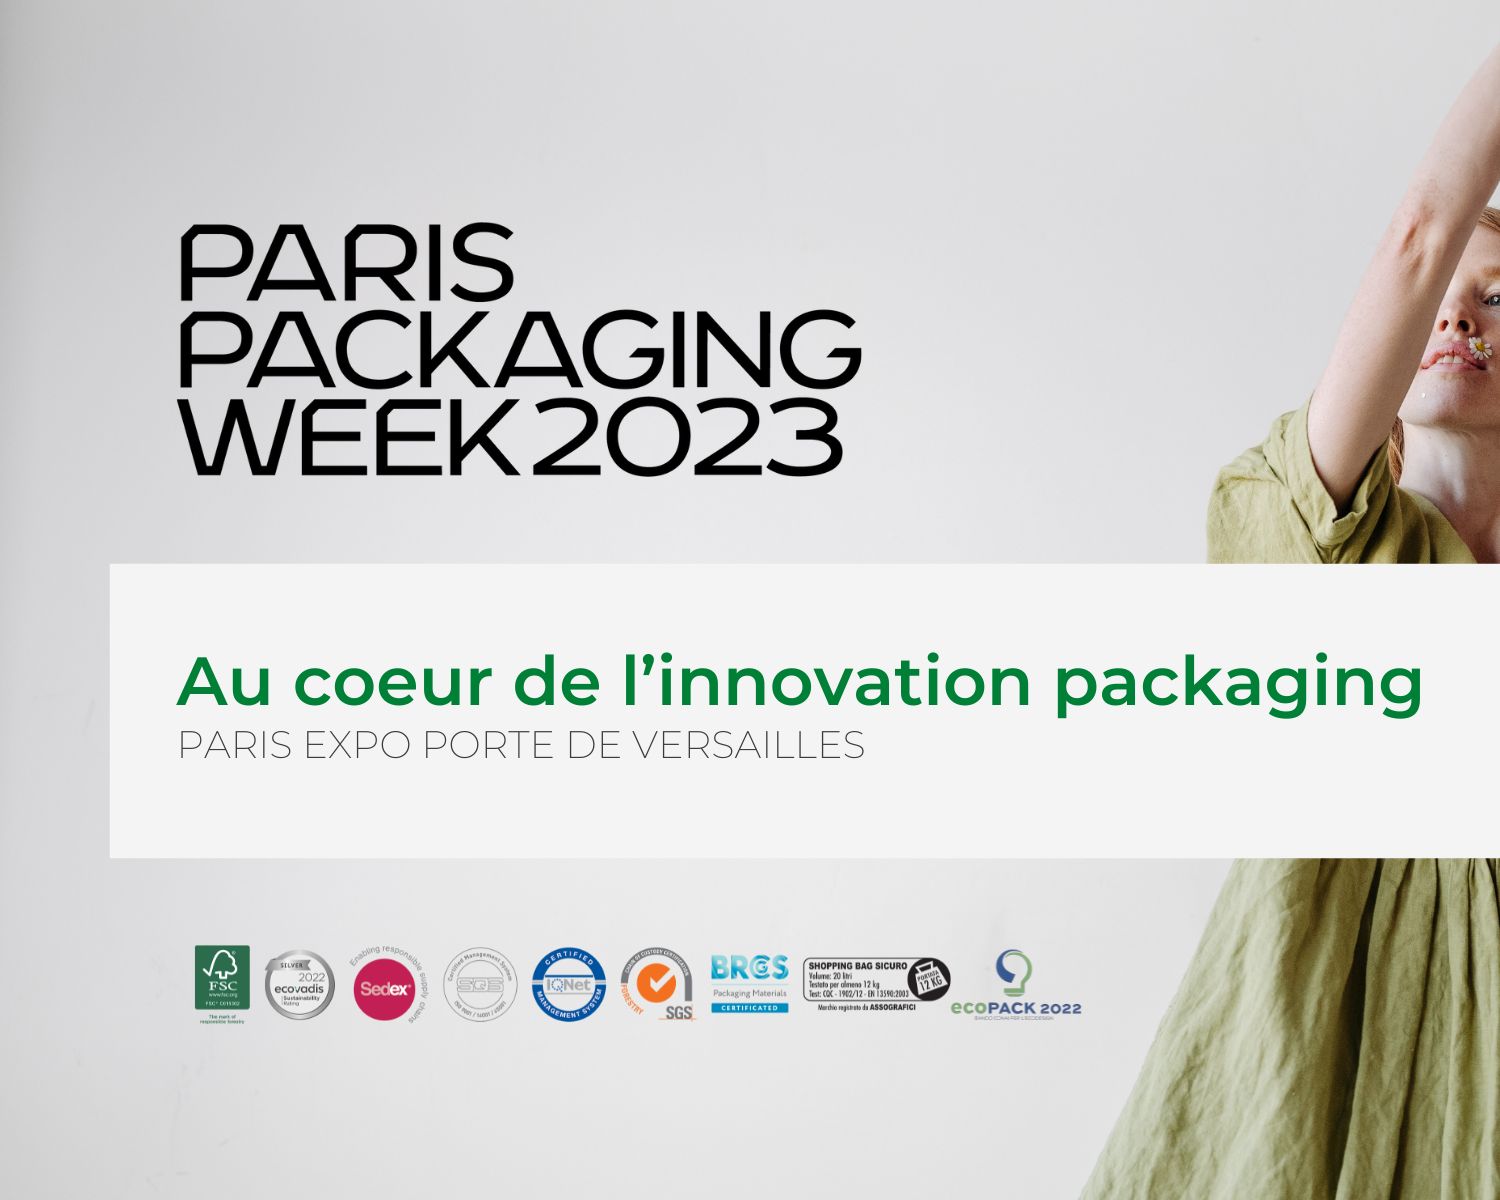 We are at Paris Packaging week, the world’s leading packaging innovation events